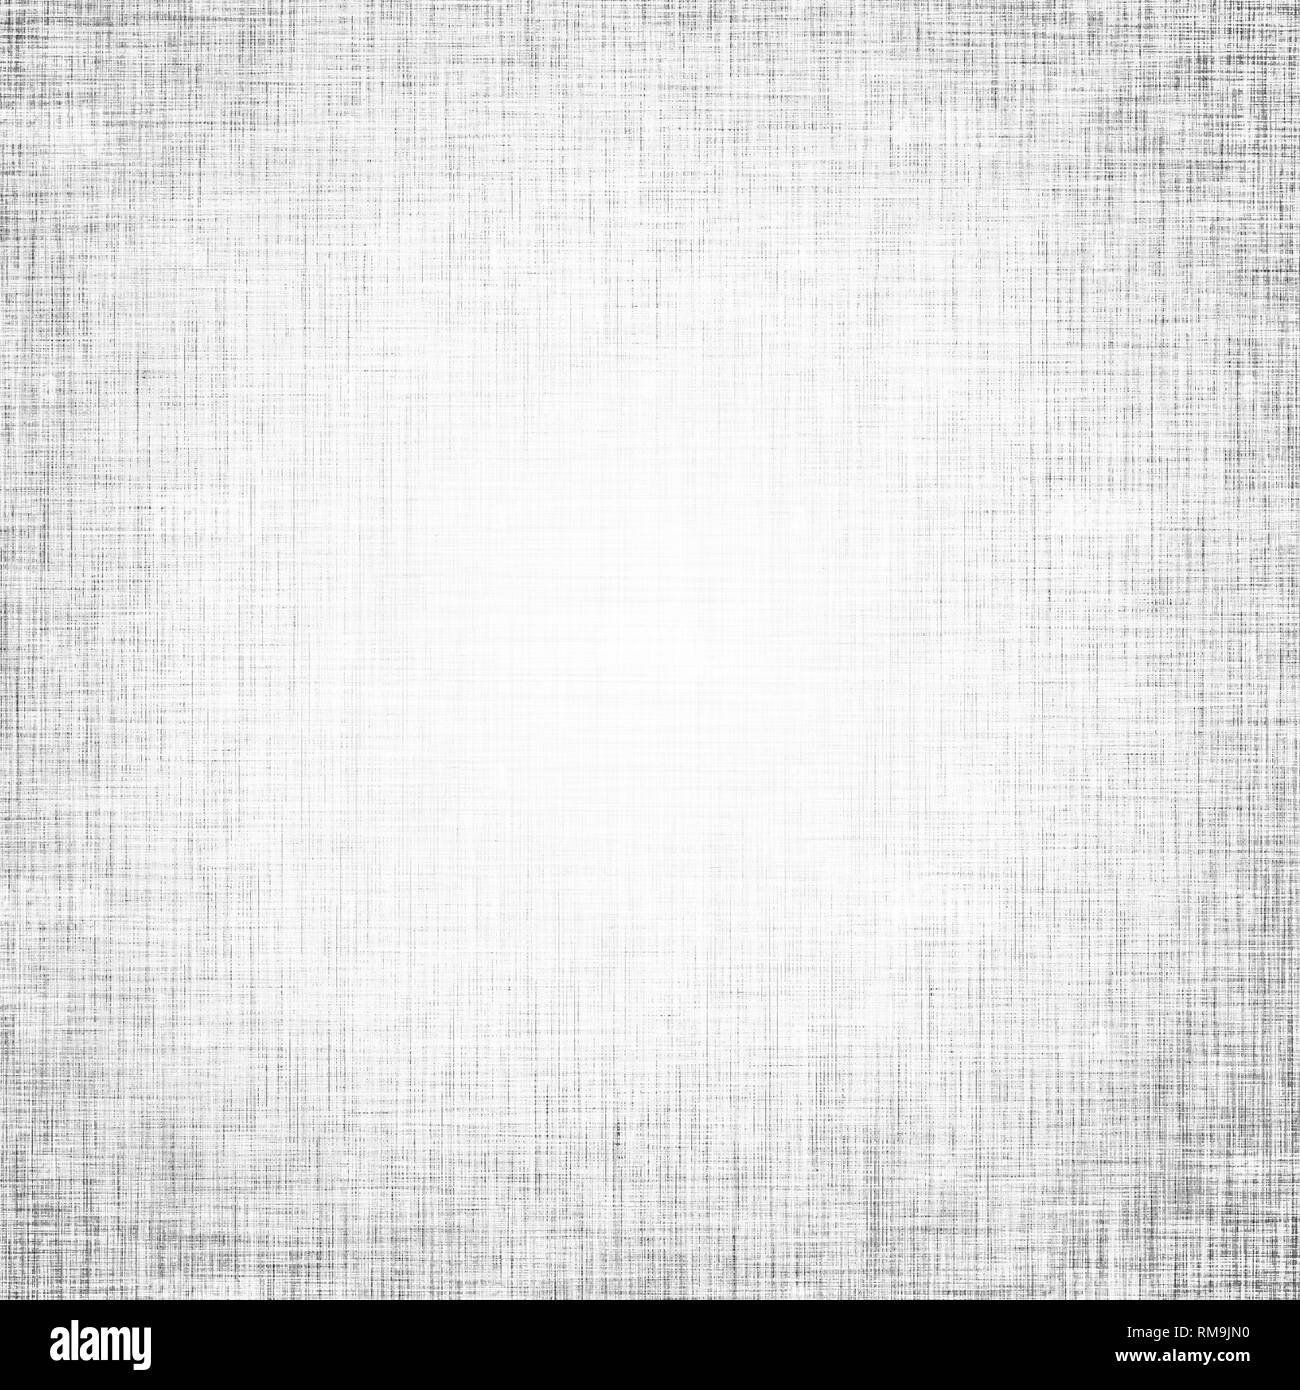 Black and white grunge background, monochrome distressed abstract texture Stock Photo